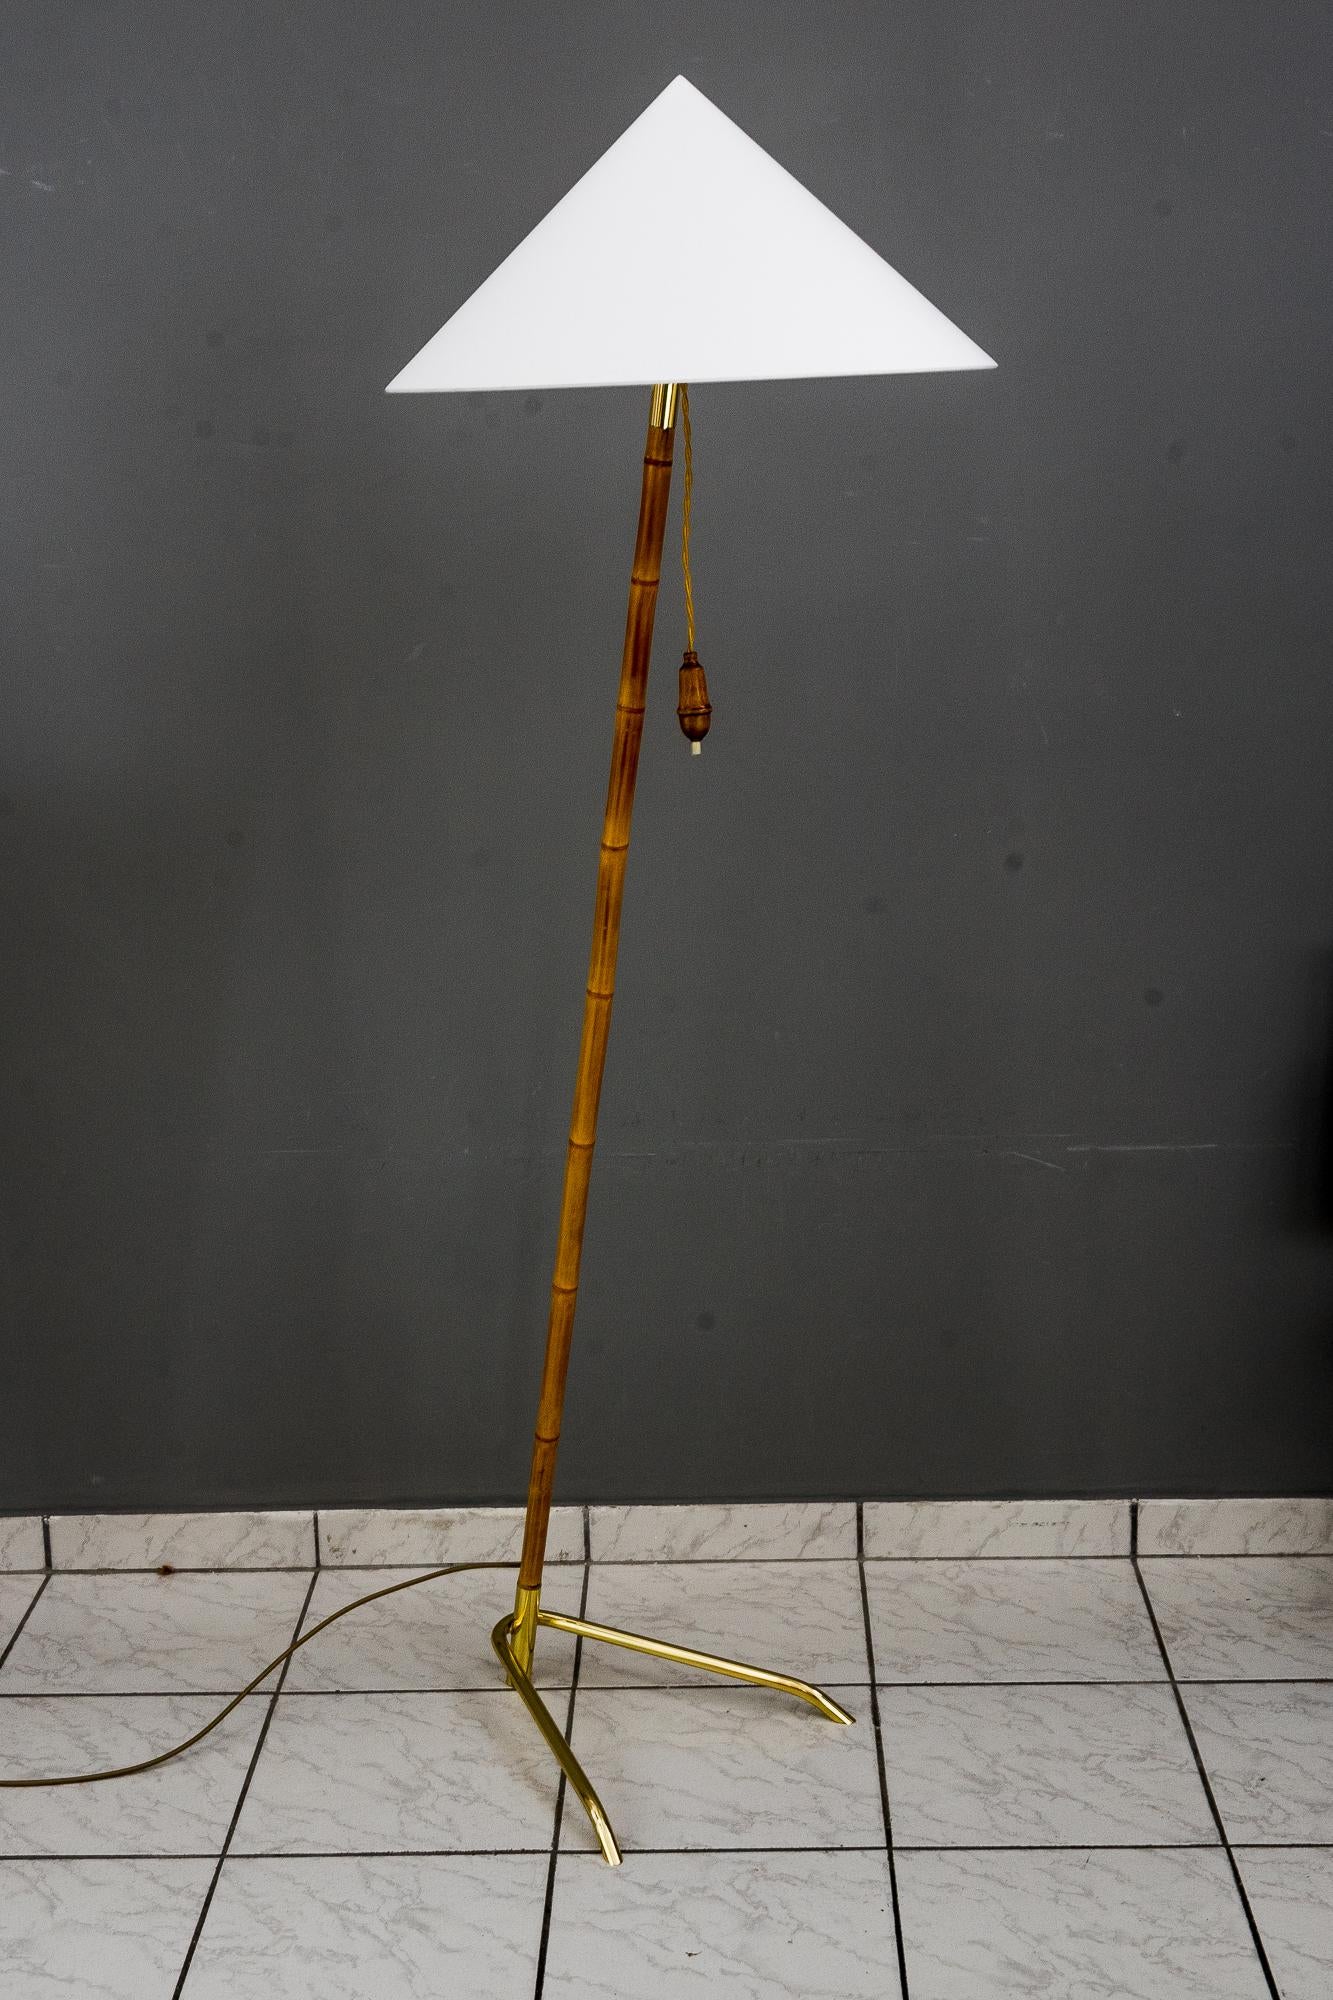 Rupert Nikoll floor lamp vienna around 1950s
Brass parts polished and stove enamelled
Bamboo stem
Shade is replaced ( new ).